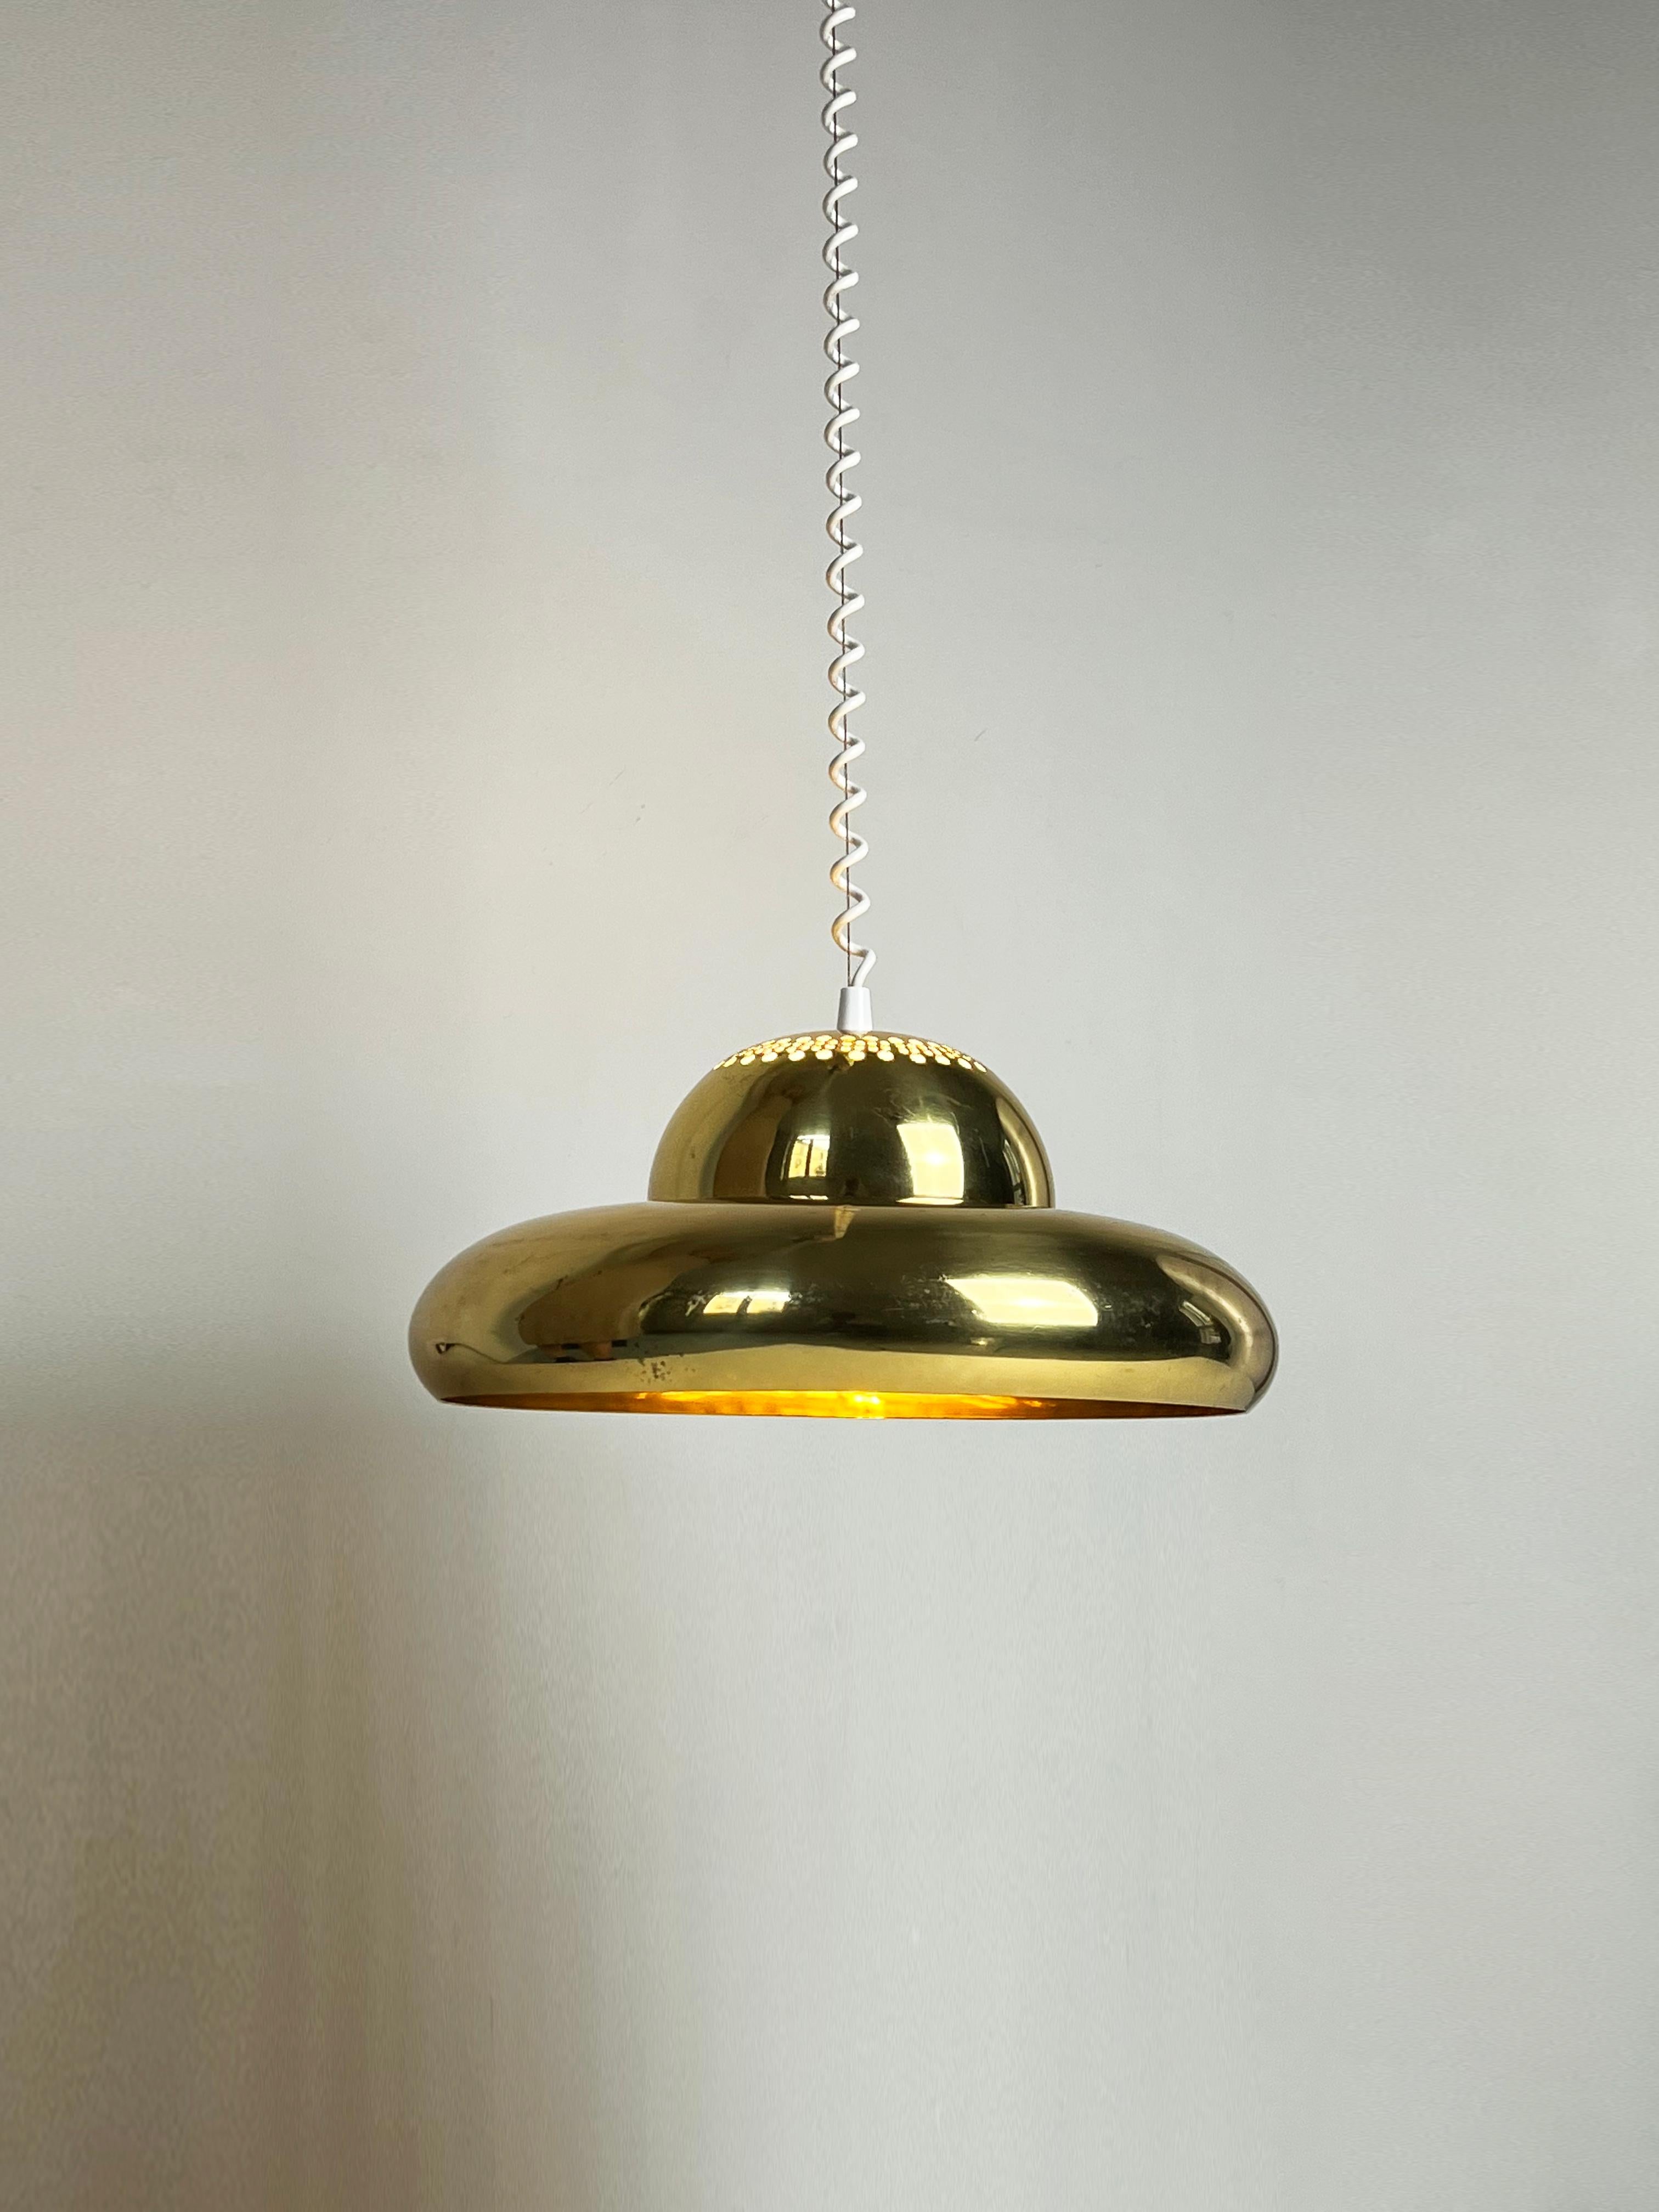 Brass Pendant Fior Di Loto by Afra and Tobia Scarpa for Flos, 1960s For Sale 4